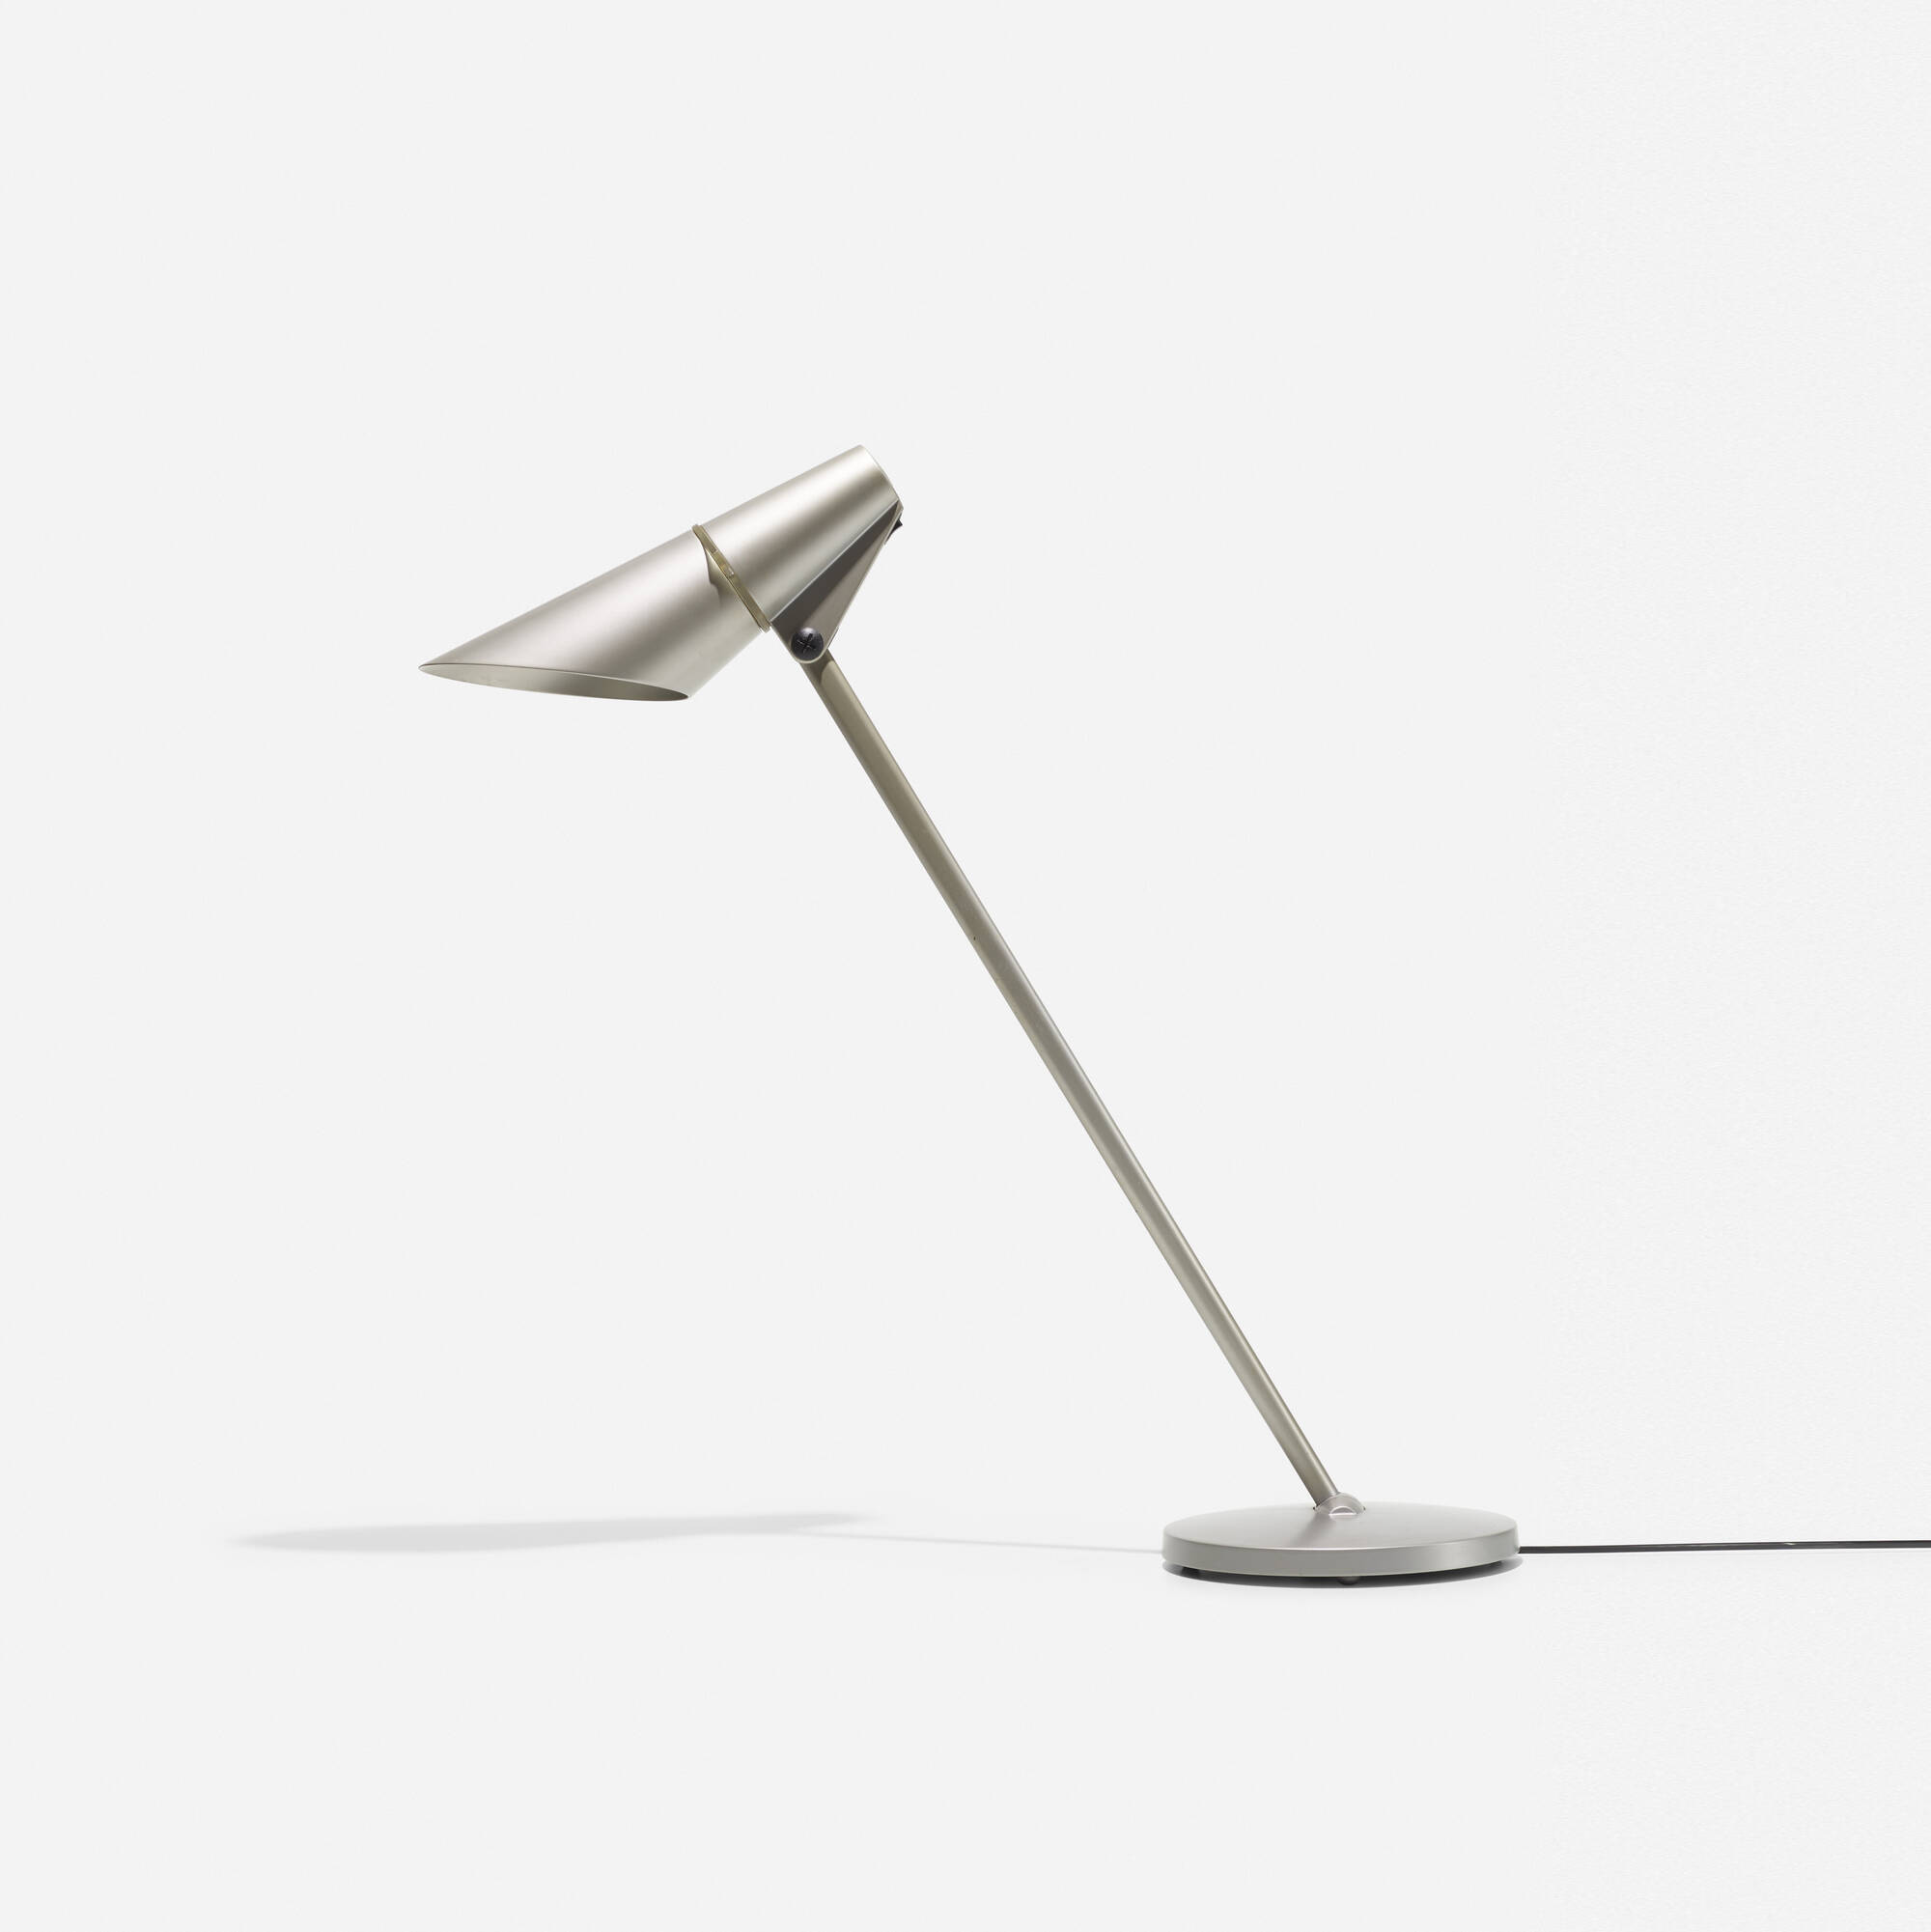 Behoefte aan Stal Gezamenlijk 315: HANNES WETTSTEIN, Spy table lamp < Taxonomy of Design: Selections from  Thessaloniki Design Museum, 25 August 2016 < Auctions | Wright: Auctions of  Art and Design